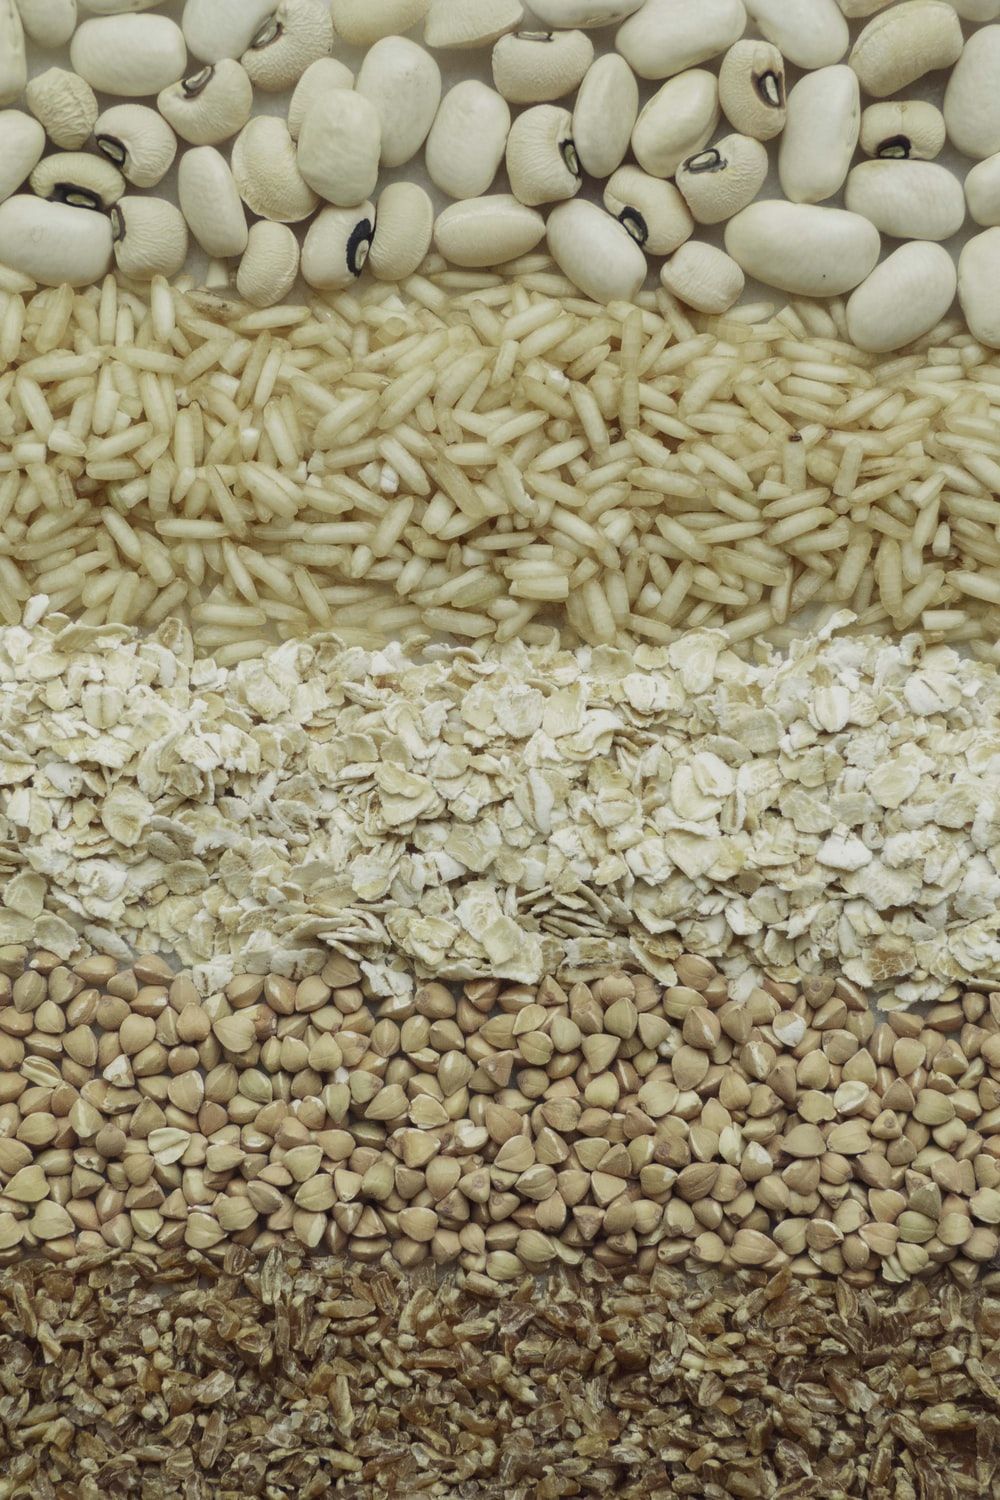 white and brown rice grains photo